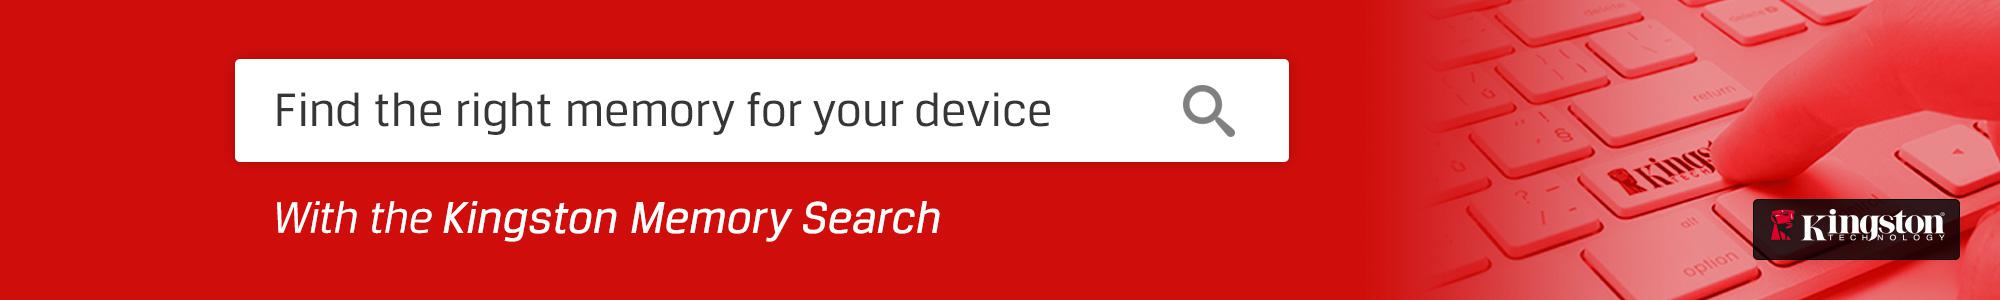 Find the right memory for your device With the Kingston Memory Search